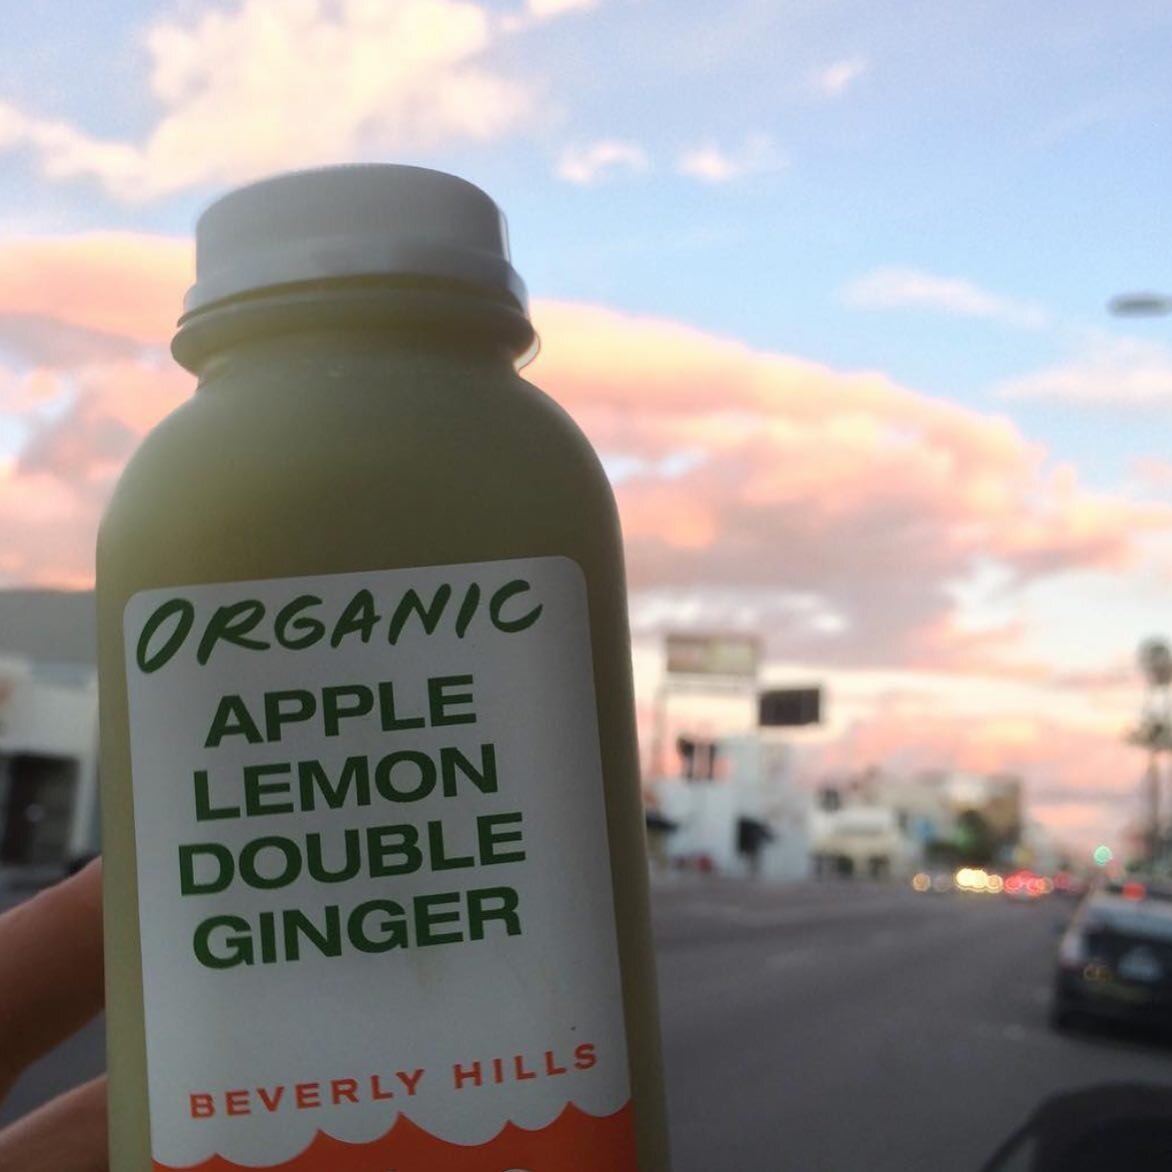 Nothing better than sunsets and fresh ginger juice to end the day~ ✨ 

📸: @hjhydrates

#juicing #freshpressed #organic #coldpressed #raw #juice #farmtotable #local #familybusiness #localfarms #health #vegetarian #vegan #beverlyhills